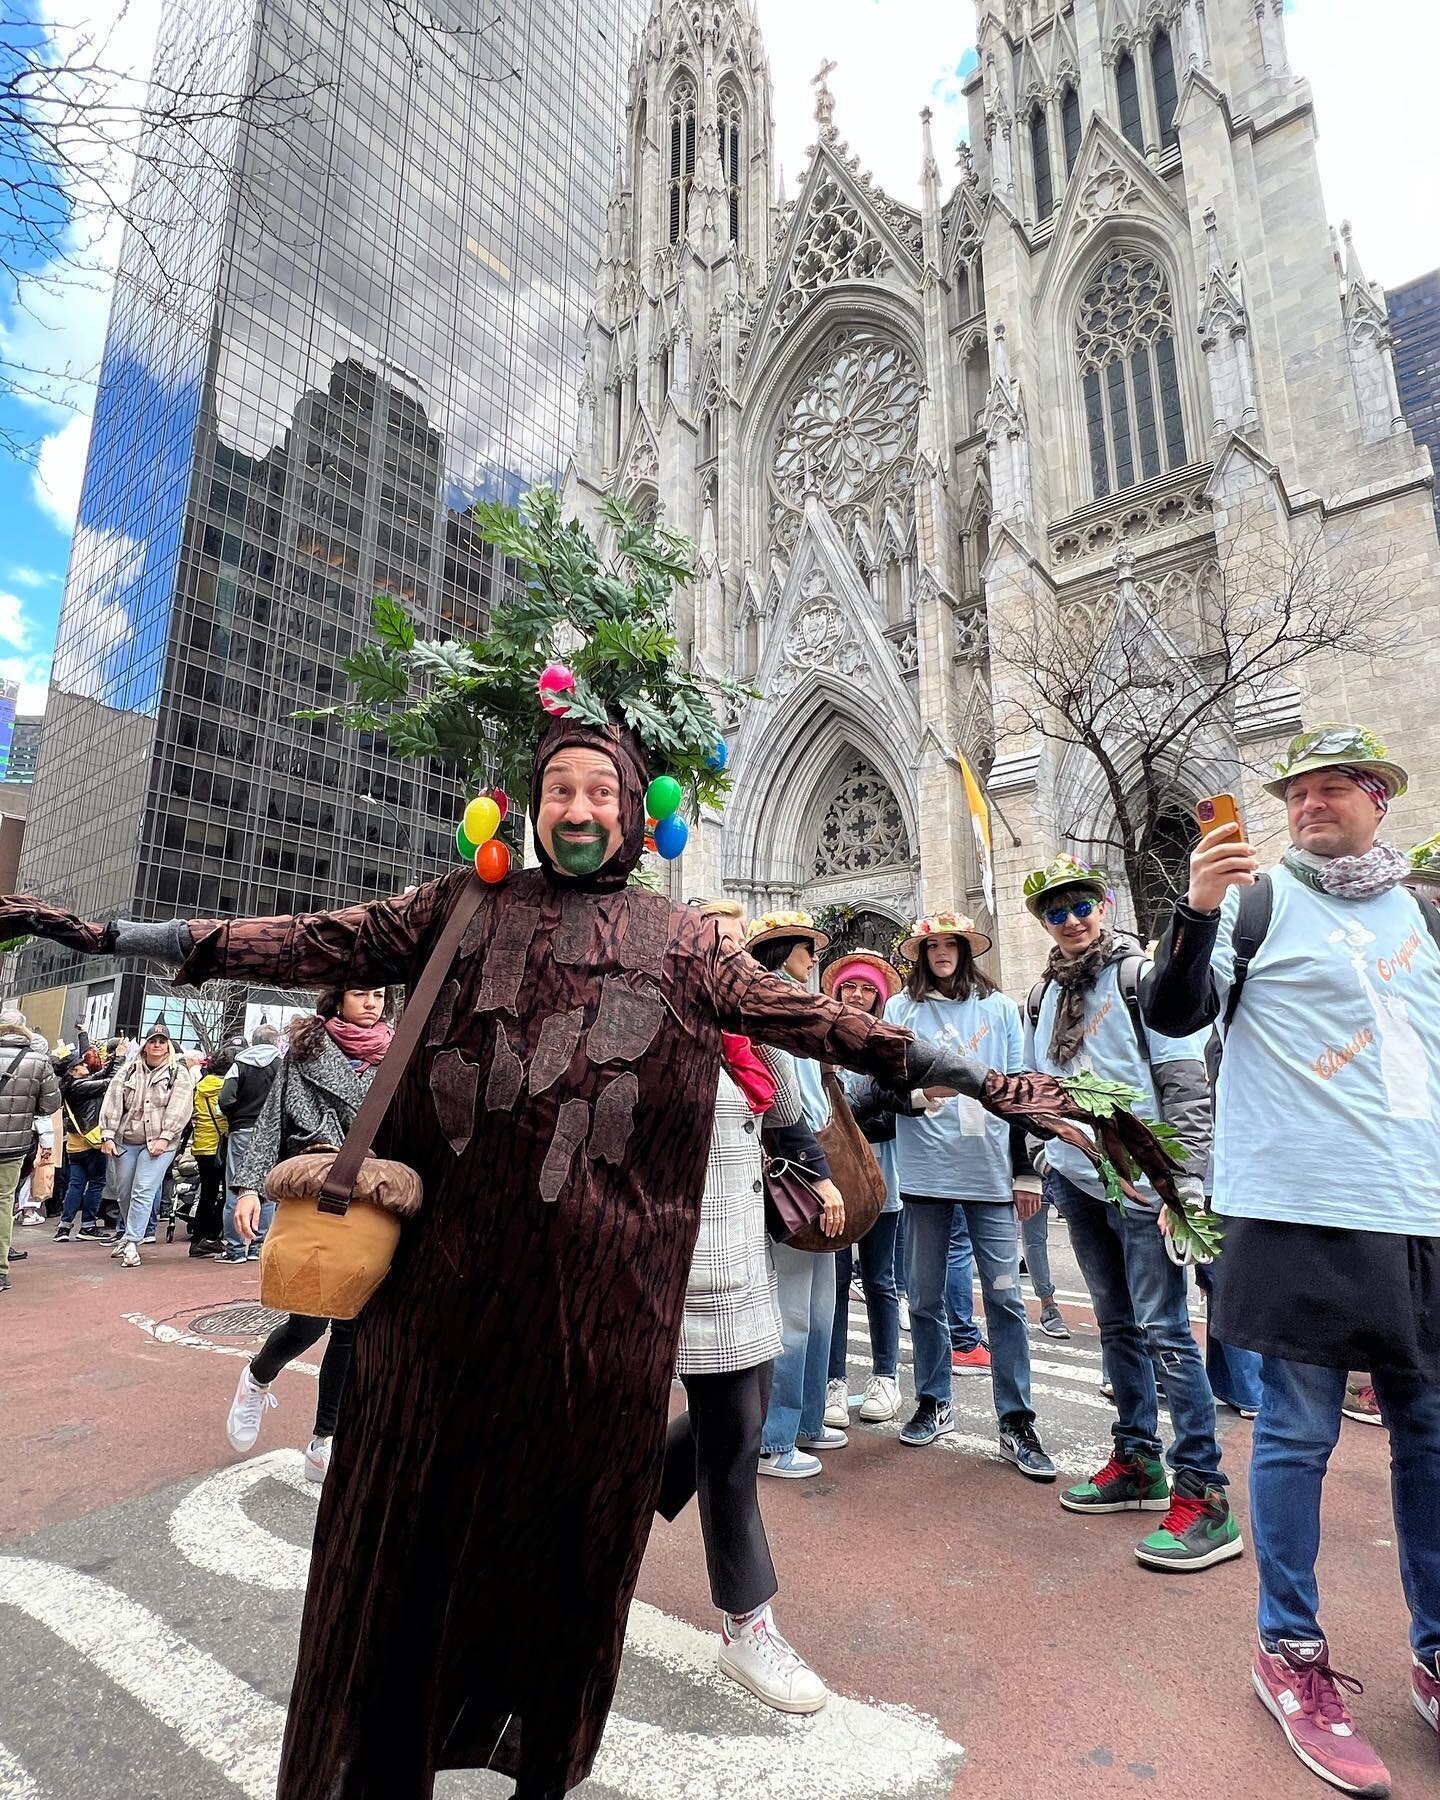 Wonderful time at the NYC Easter Parade &amp; Bonnet Festival today! 🥚🌸🐰

Happy Easter and Happy Passover! Swipe through to see some of the friends @thenyctree made today 🌳